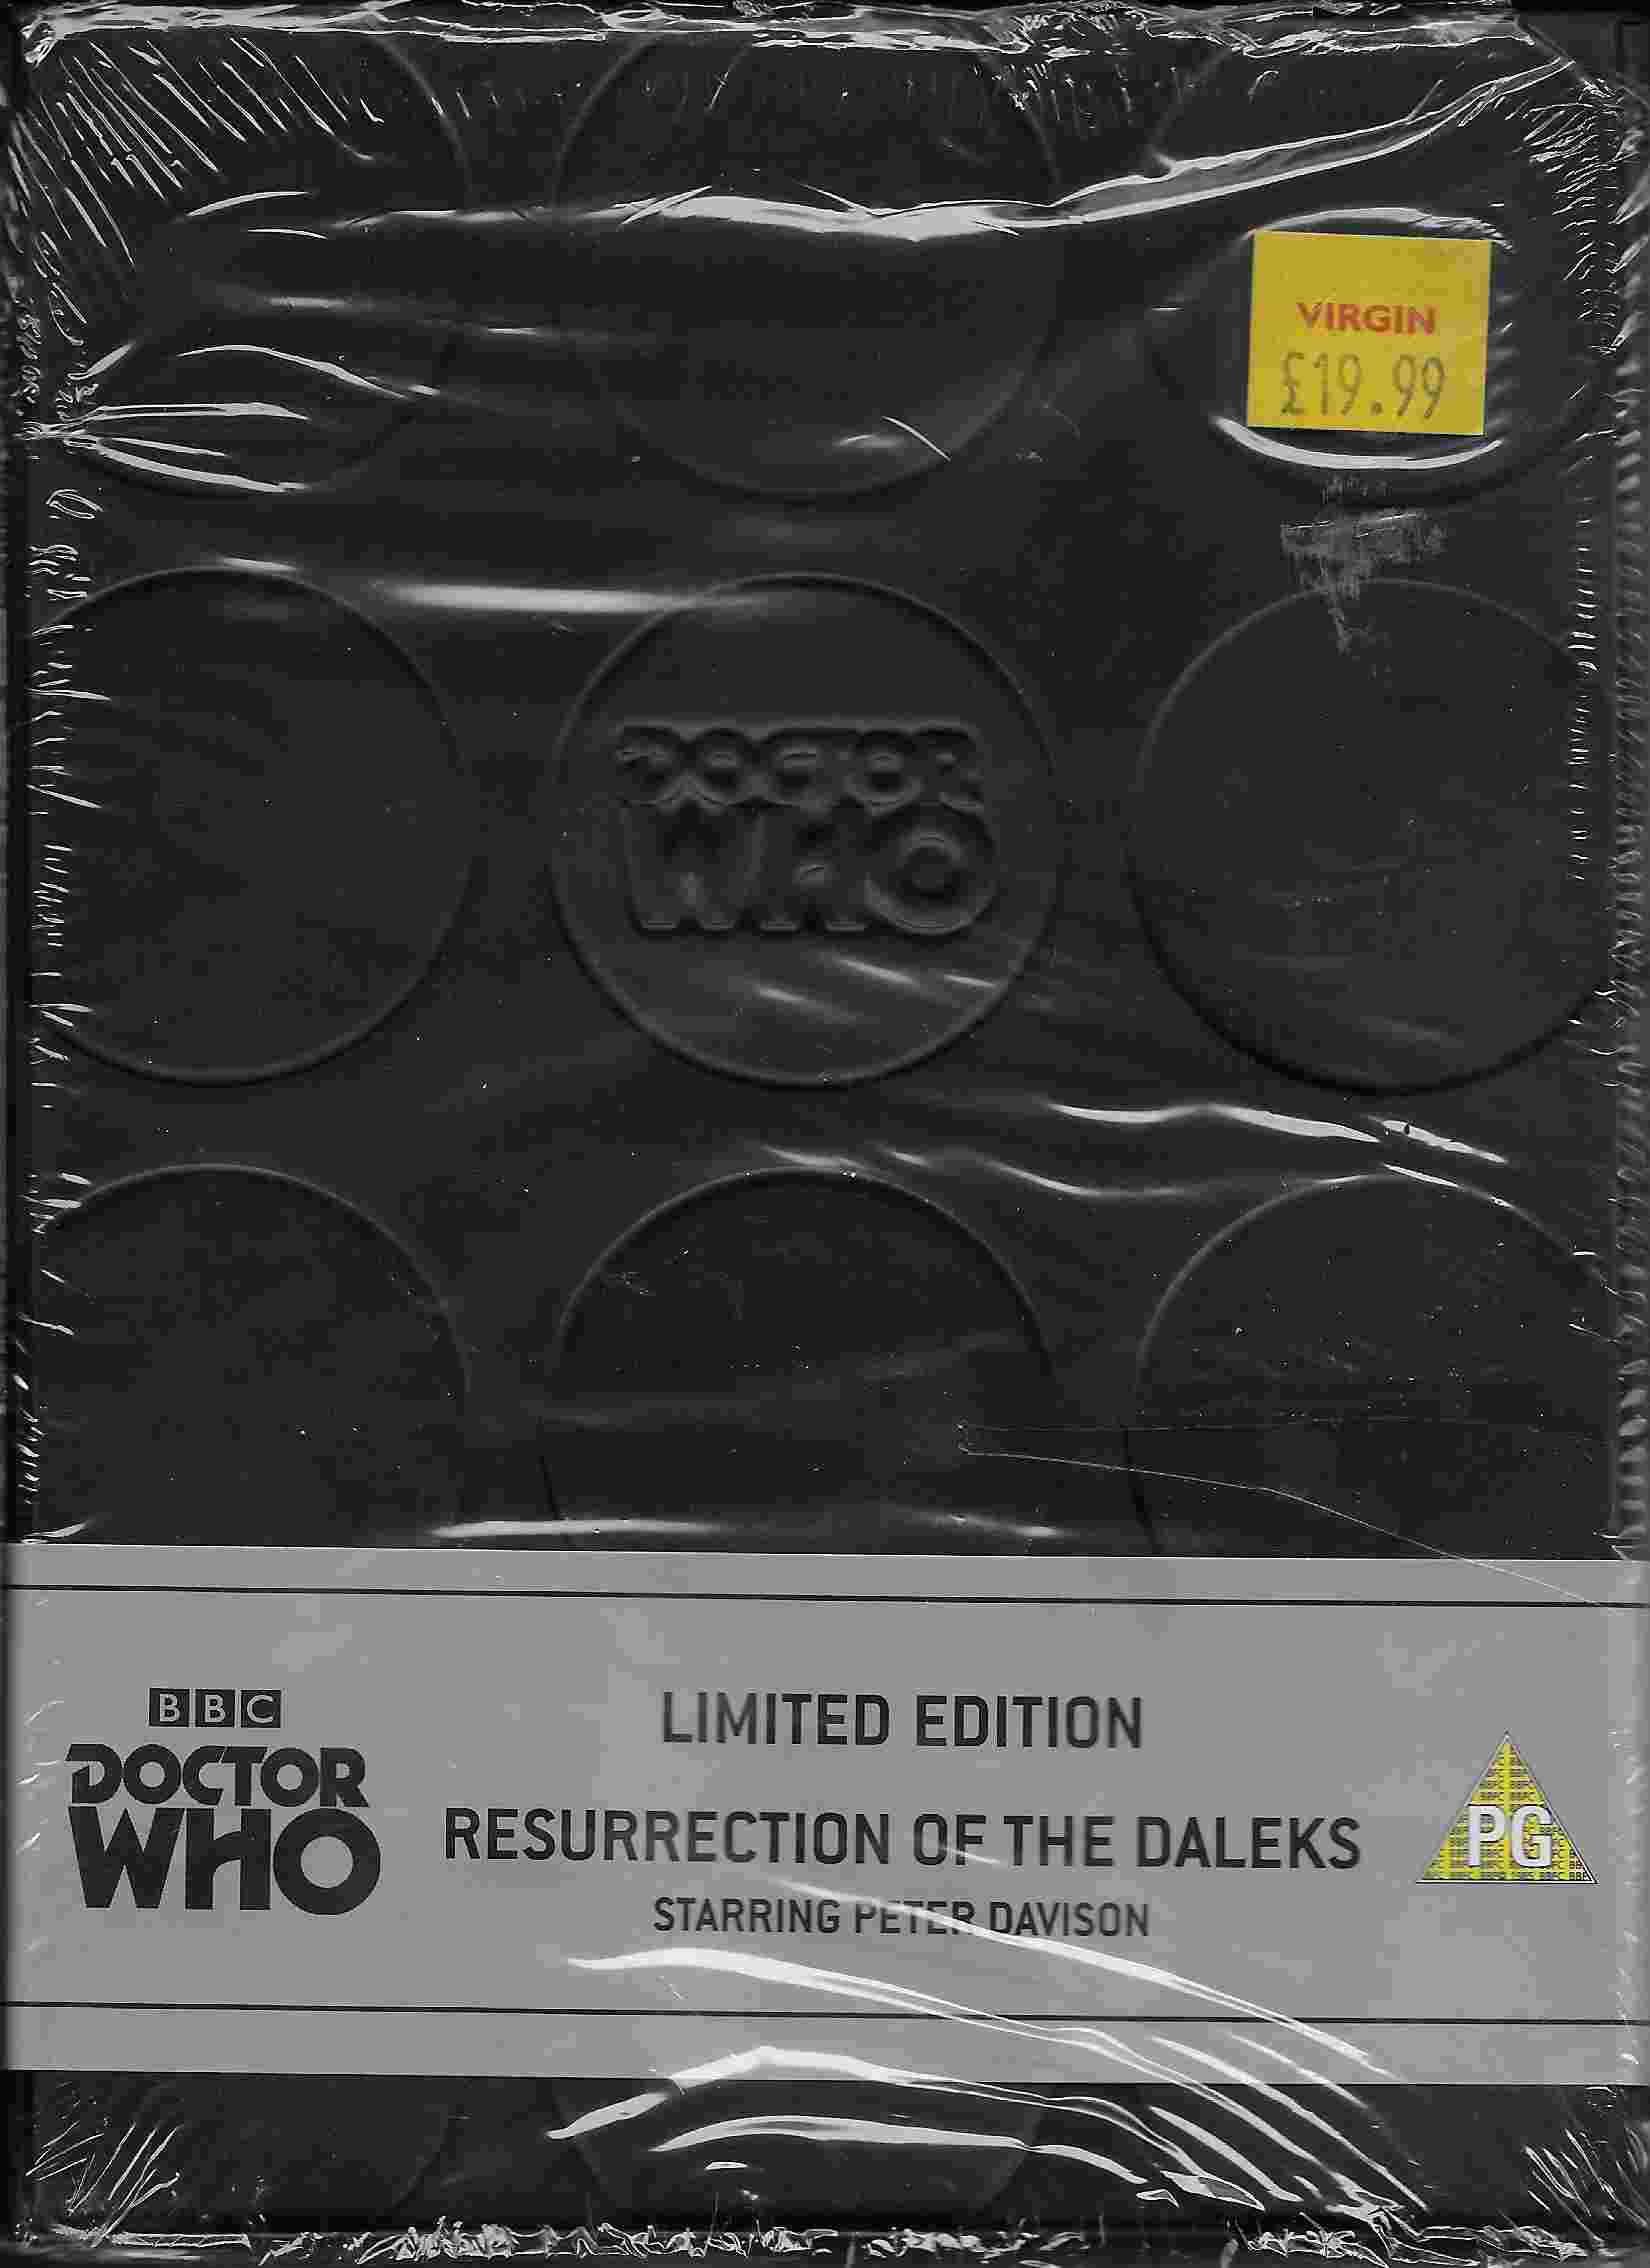 Picture of BBCDVD 1100 Doctor Who - Resurrection of the Daleks - Limited edition by artist Eric Saward from the BBC dvds - Records and Tapes library